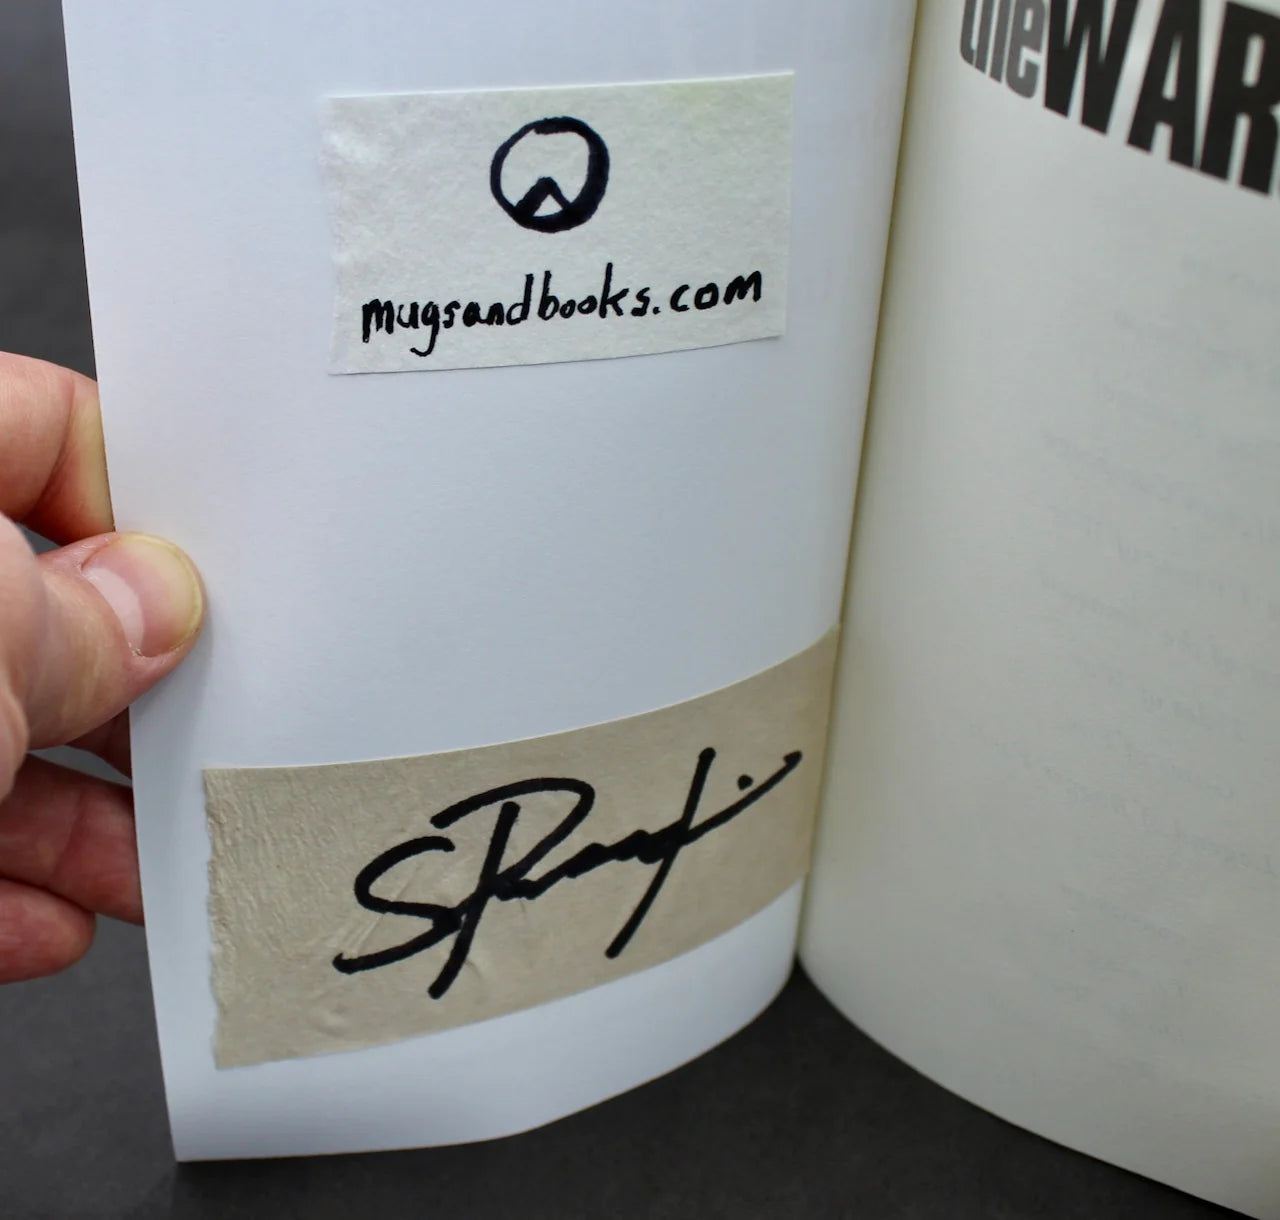 One Bullet Flower Mug and Autographed Book, "The War of Art" by Steven Pressfield (SK7800)